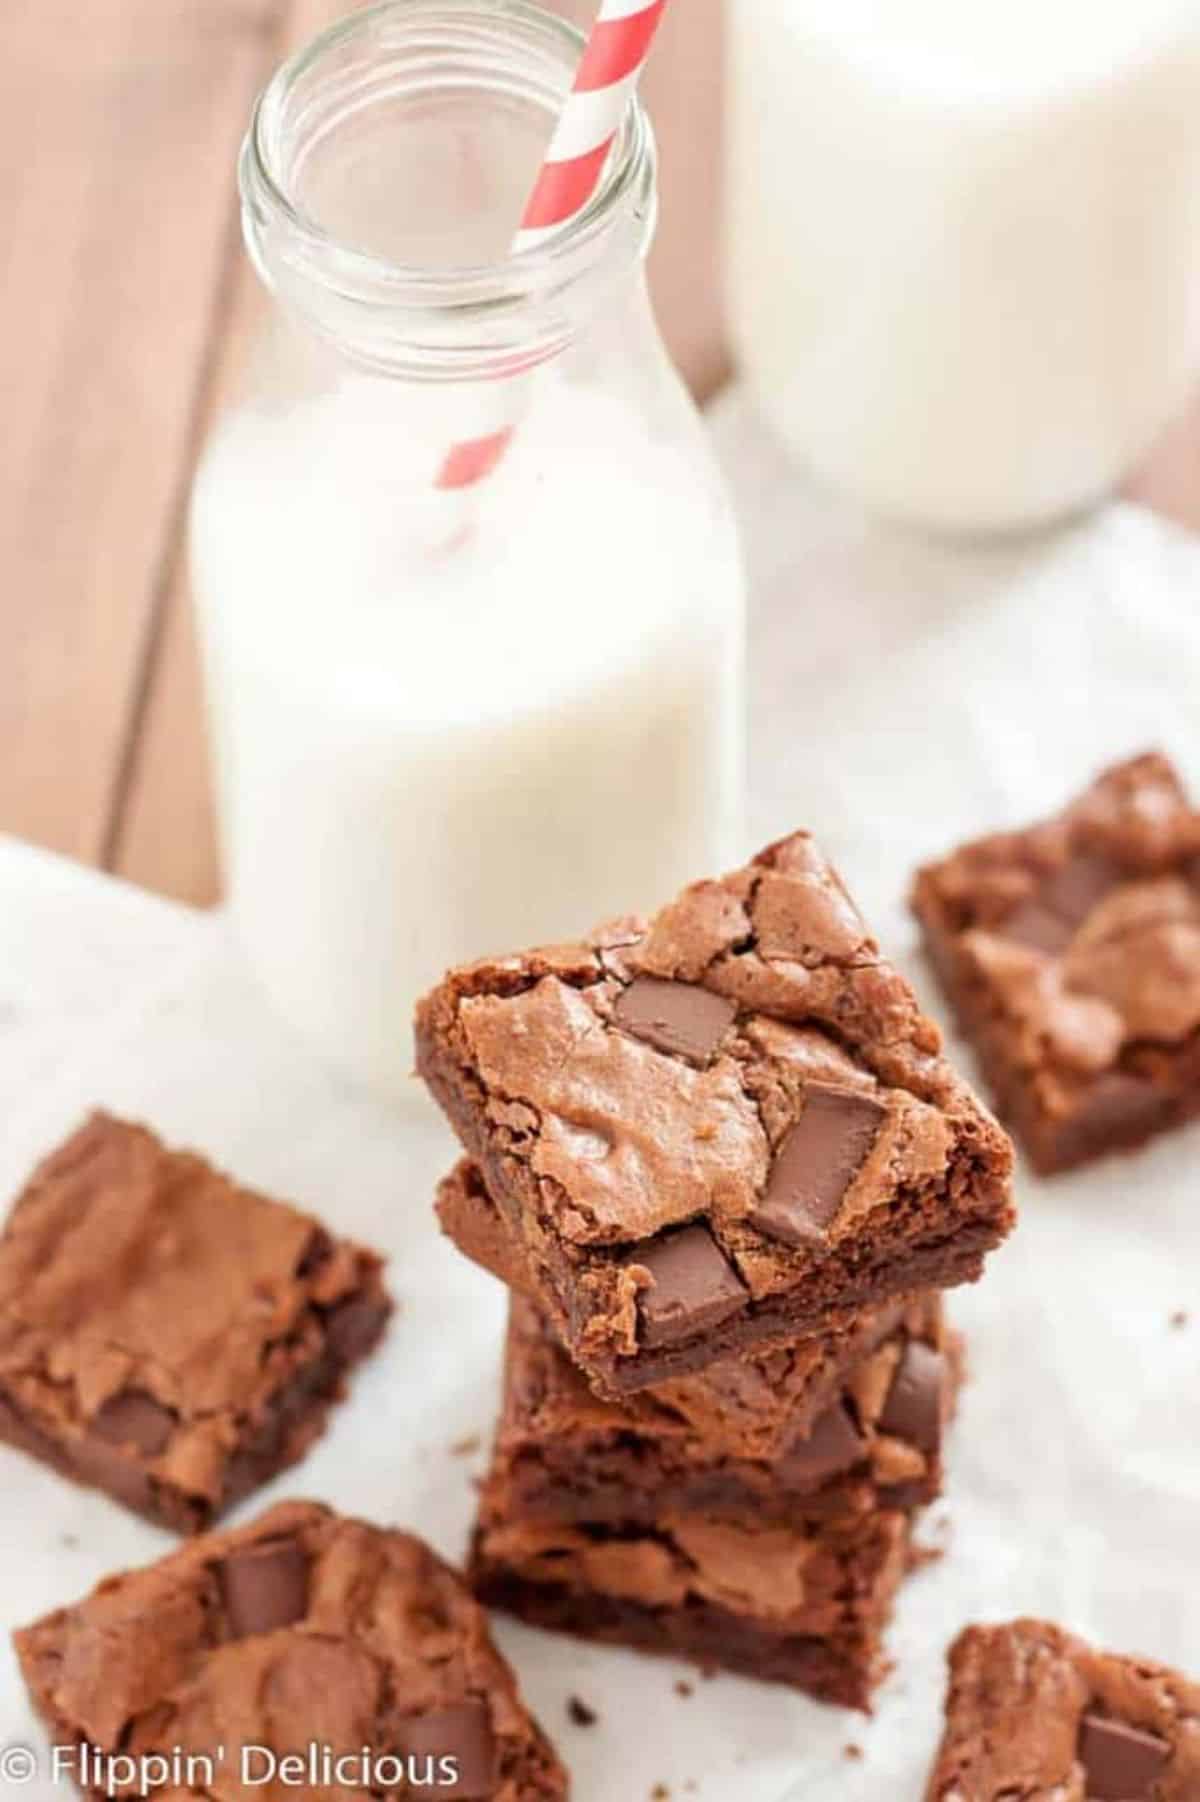 Flavorful Gluten-Free Brownies with a jar of milk on a table.